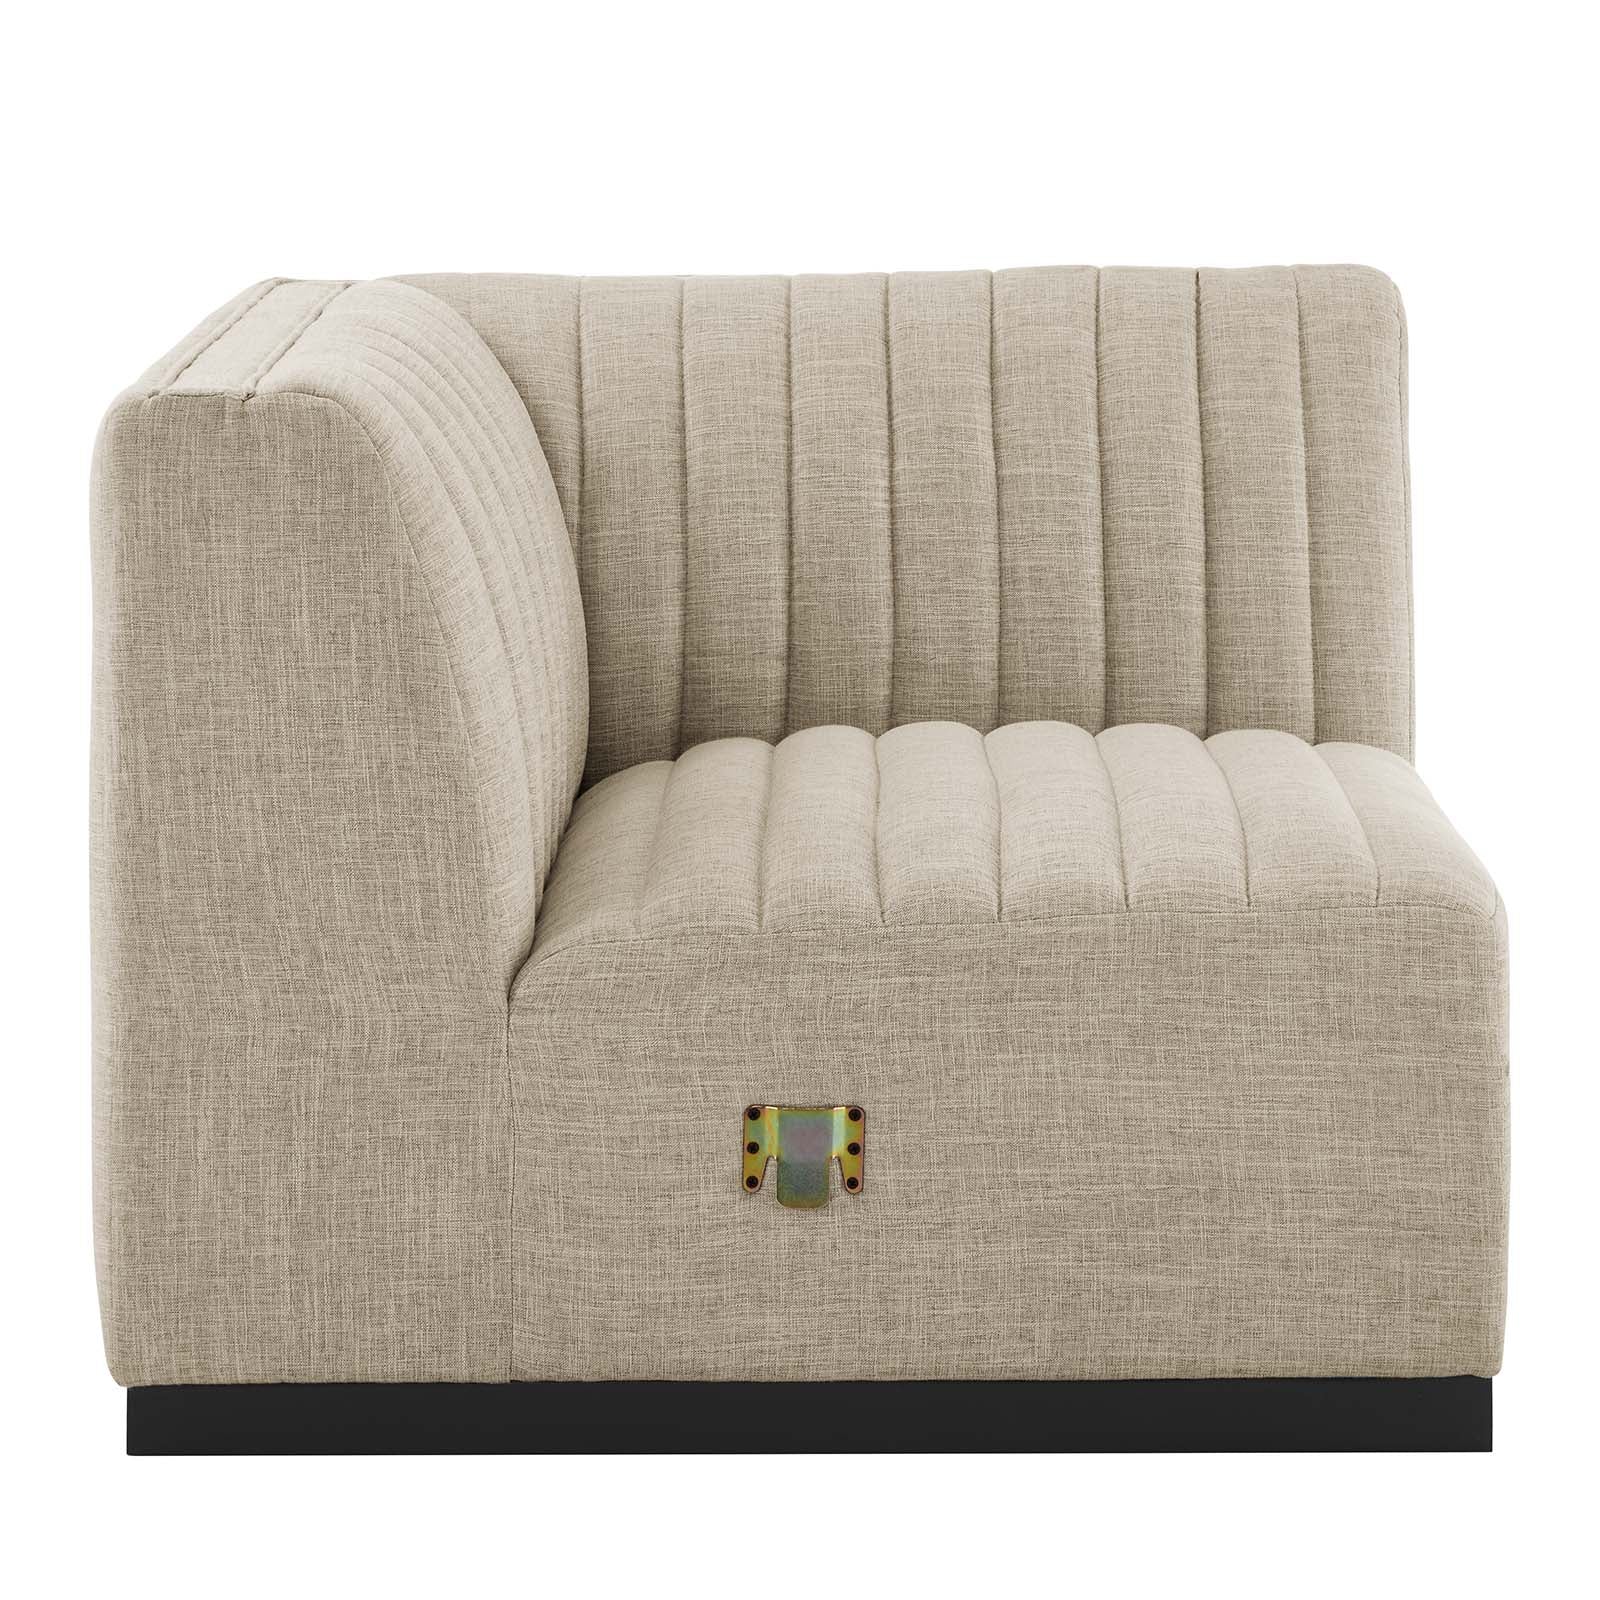 Conjure Channel Tufted Upholstered Fabric Left Corner Chair-Chair-Modway-Wall2Wall Furnishings